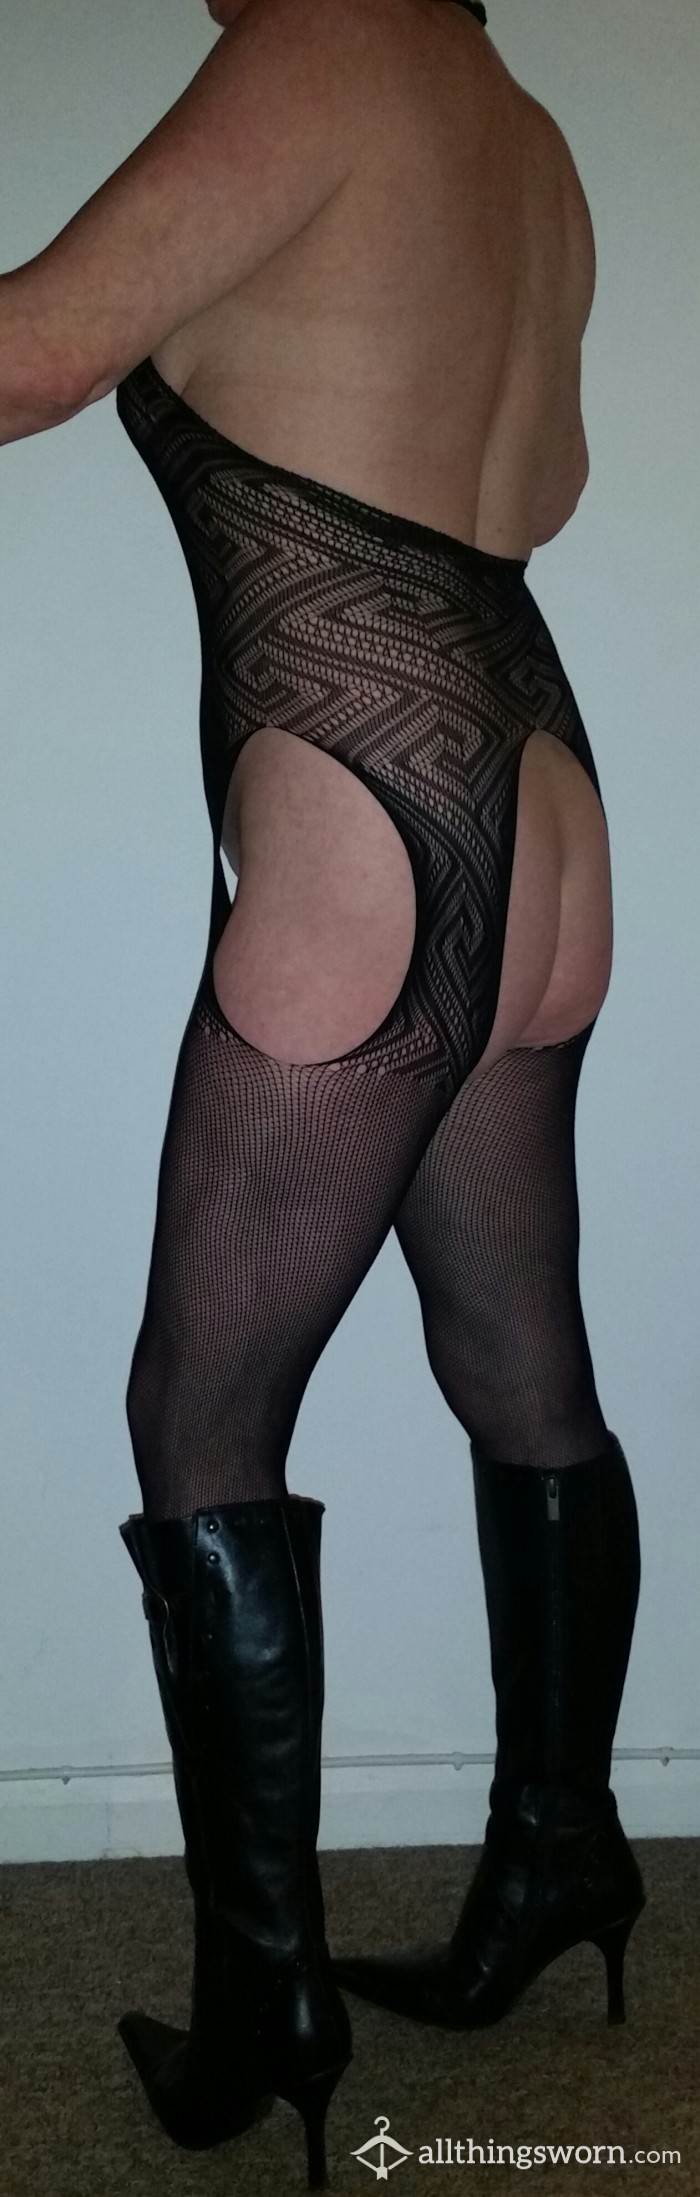 Very Well Worn Crotchless Bodystocking